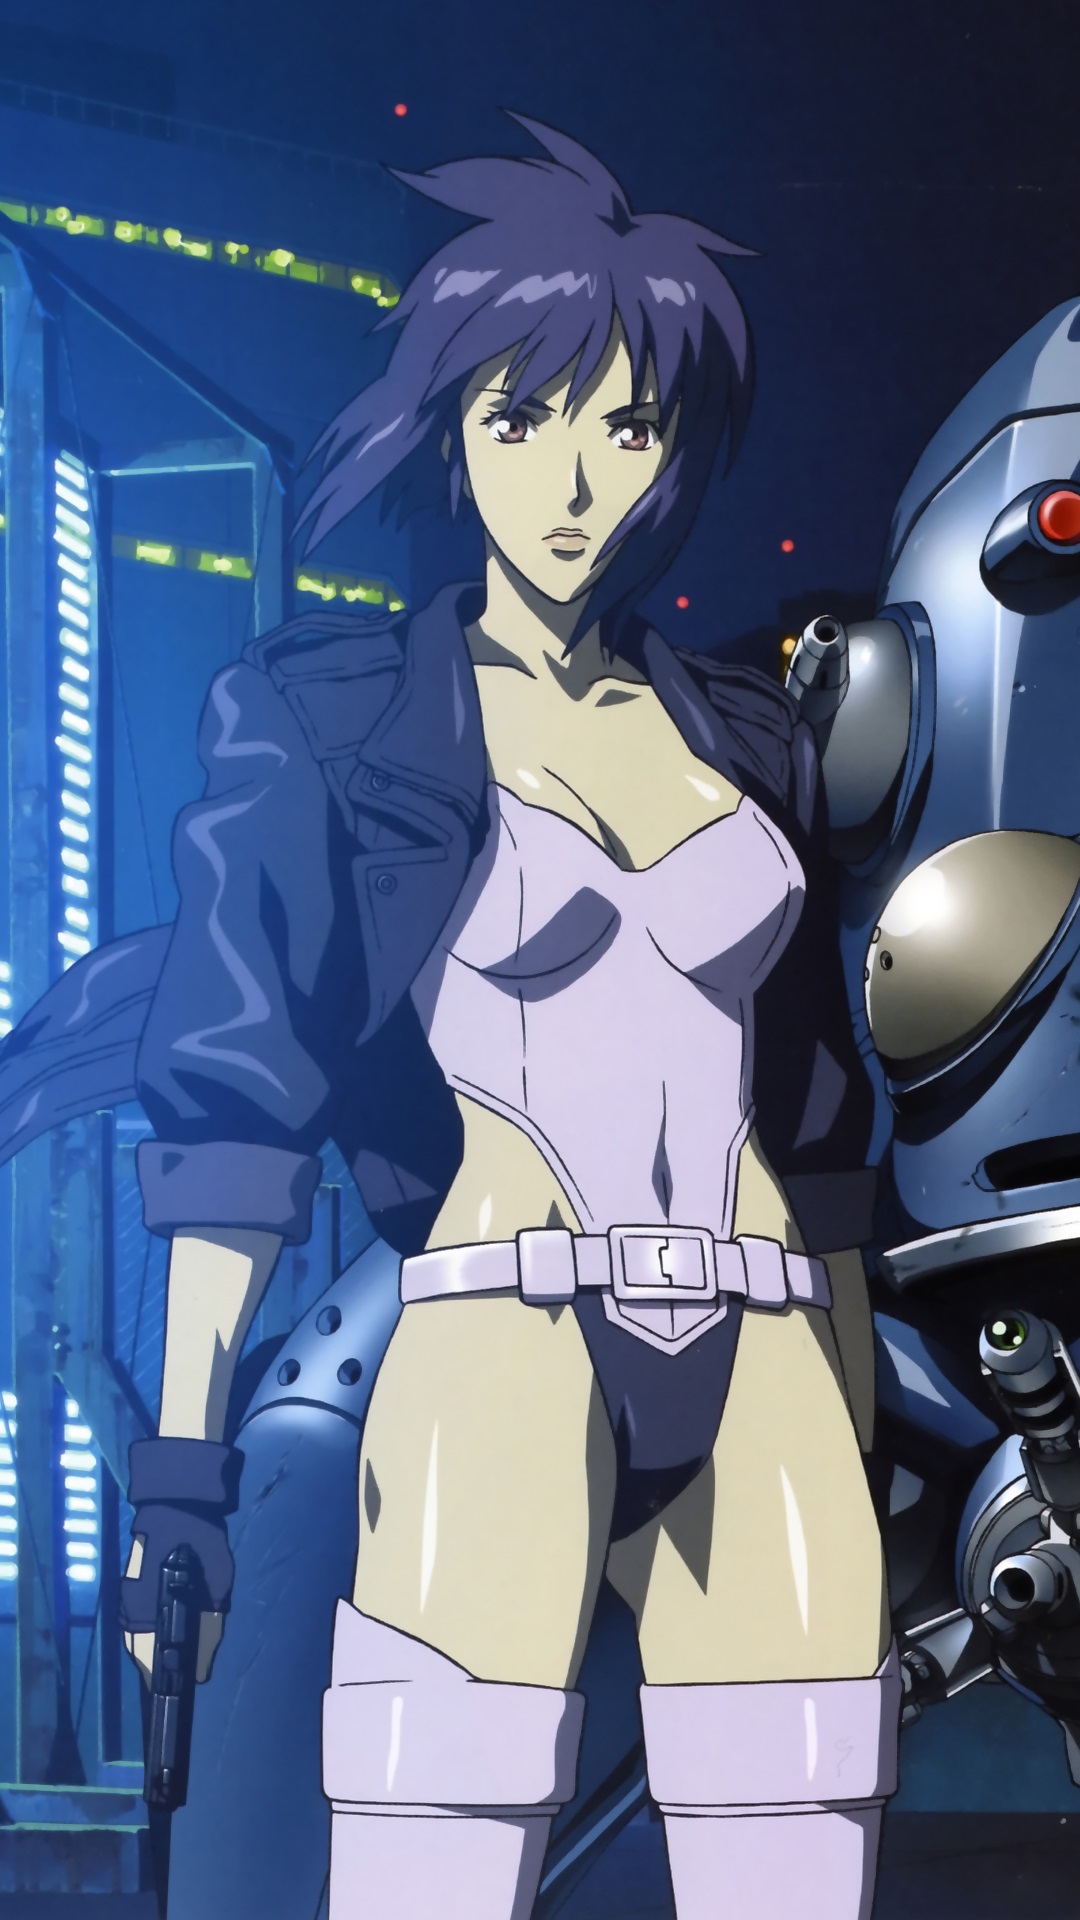 Ghost In The Shell Motoko Kusanagi - Ghost In The Shell Stand Alone Complex Cover , HD Wallpaper & Backgrounds